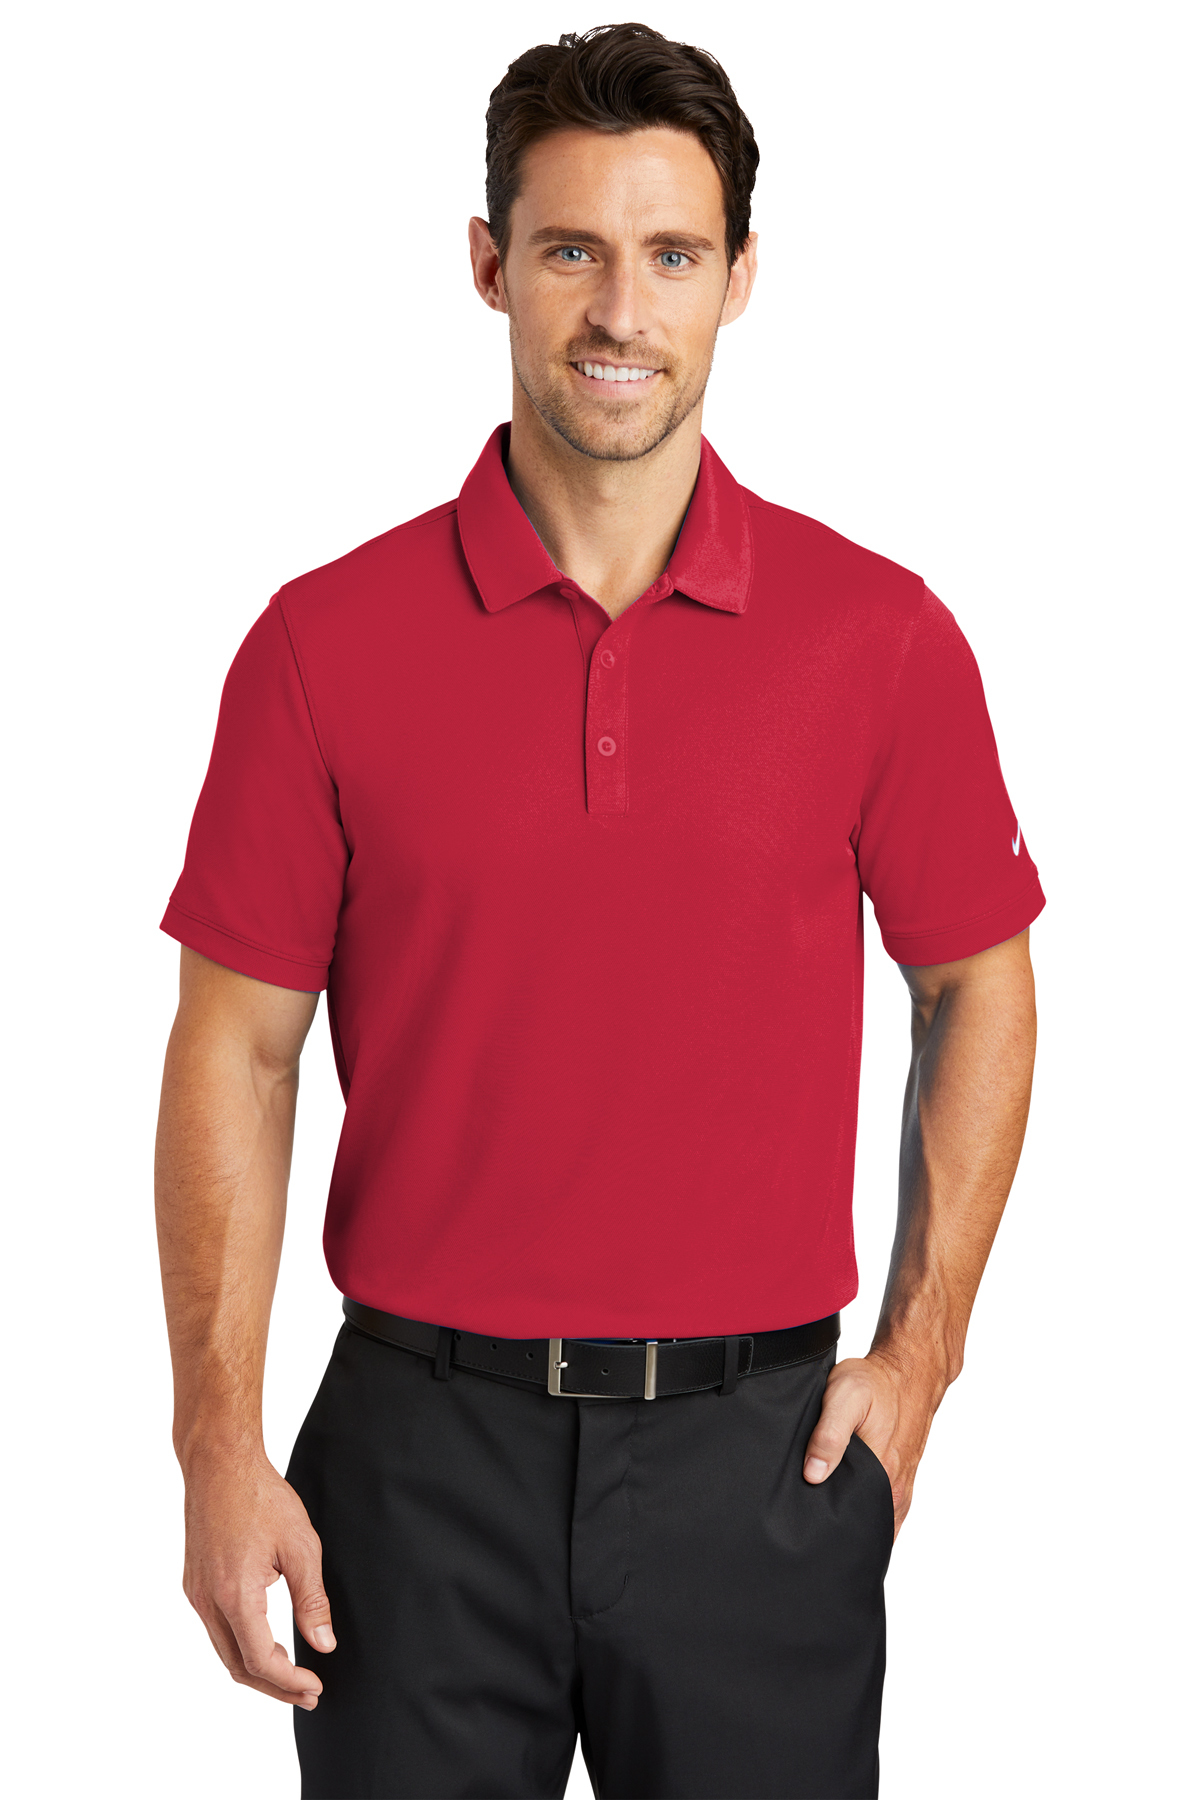 Nike Dri-FIT Modern Fit Polo -Solid Icon Pique Knit. 746099